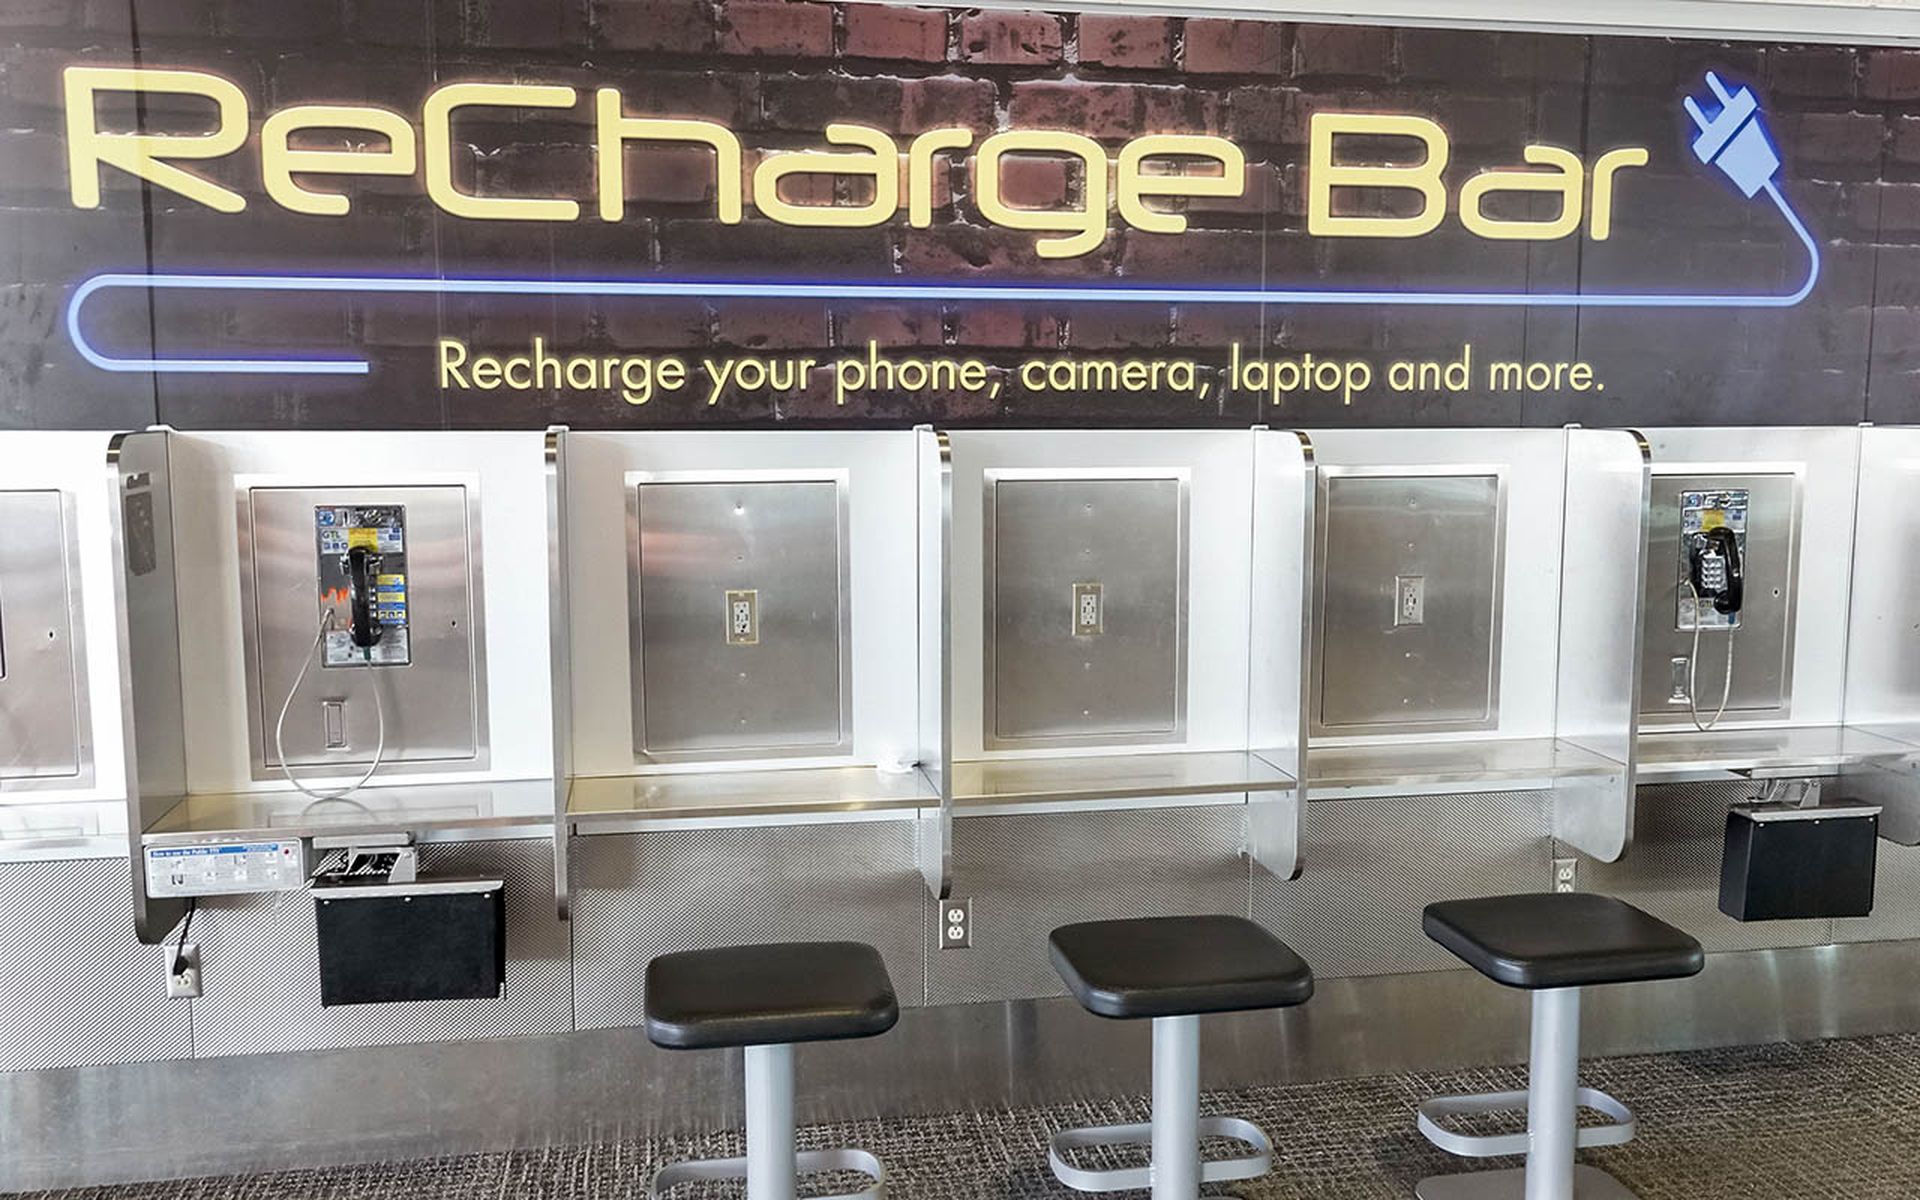 Charging station for devices at an airport